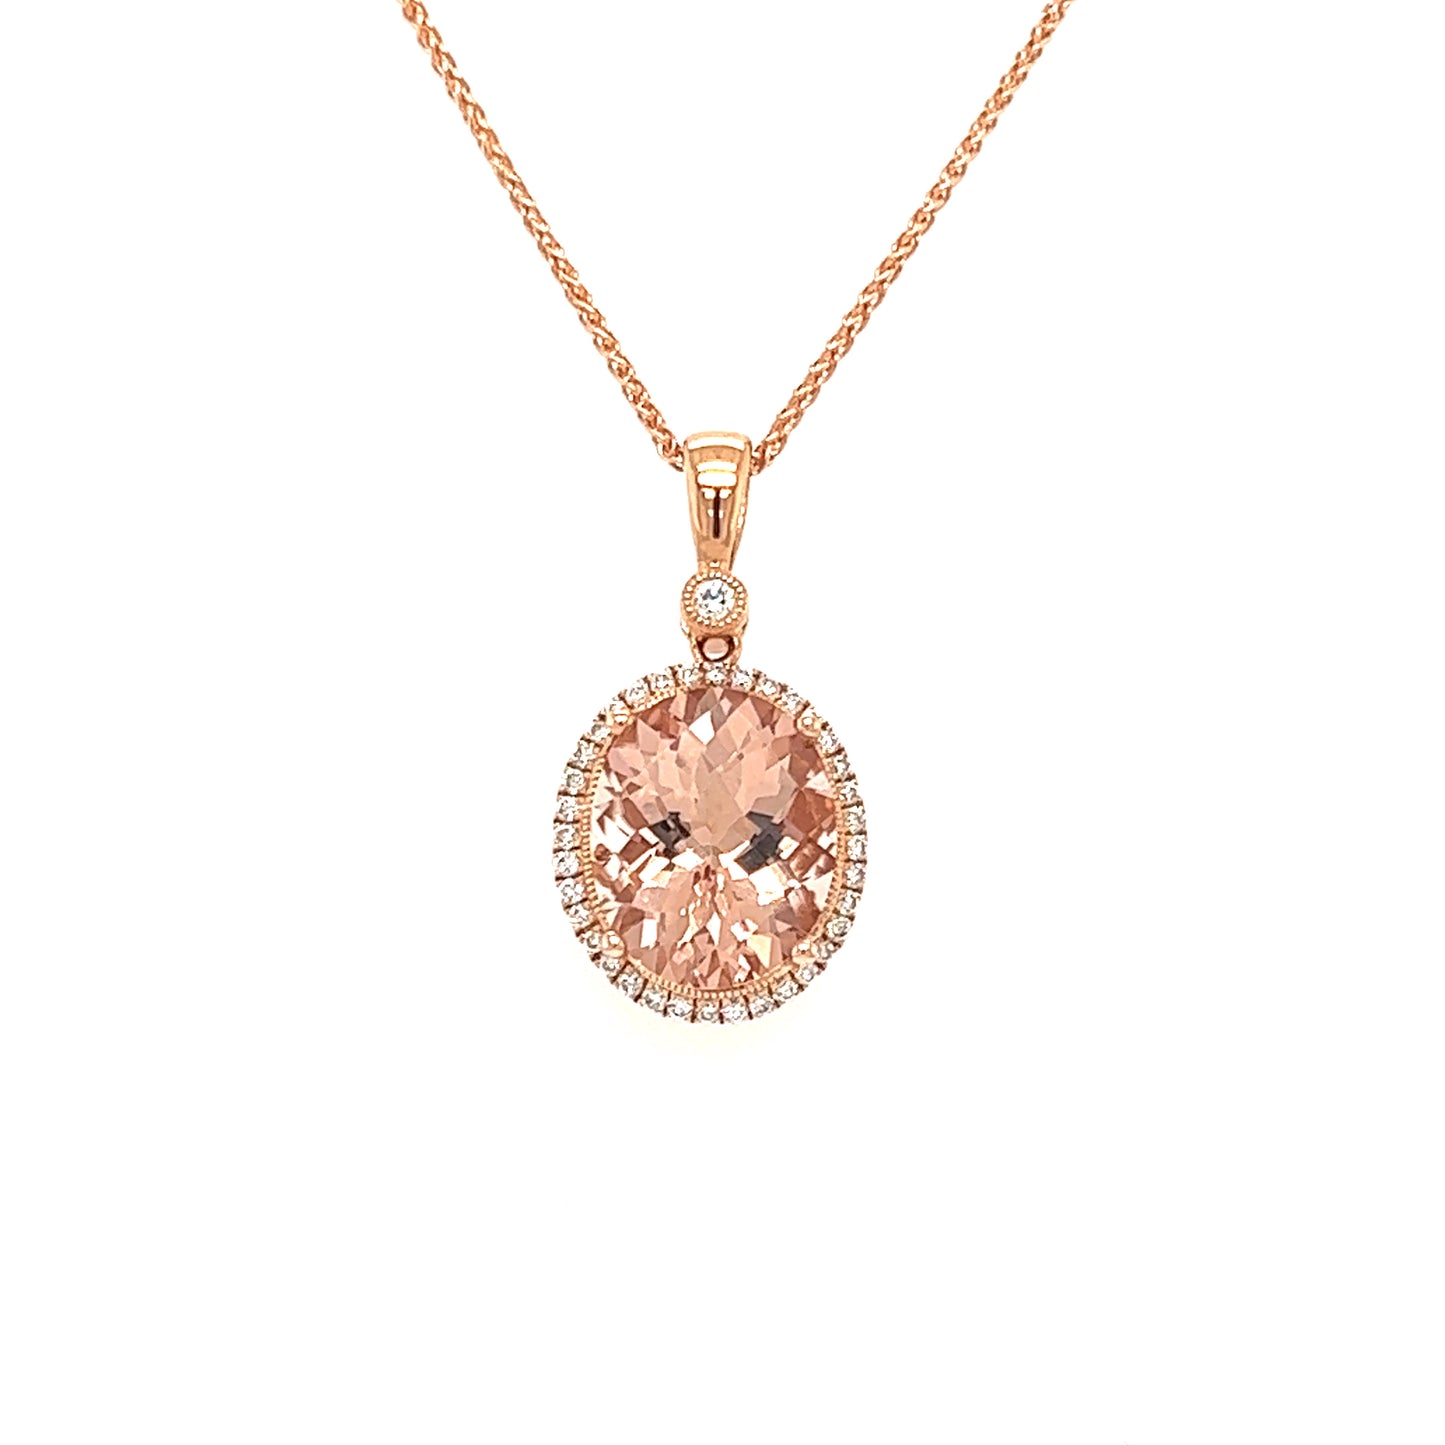 Oval Morganite Necklace with Diamond Halo in 14K Rose Gold Pendant Closer View